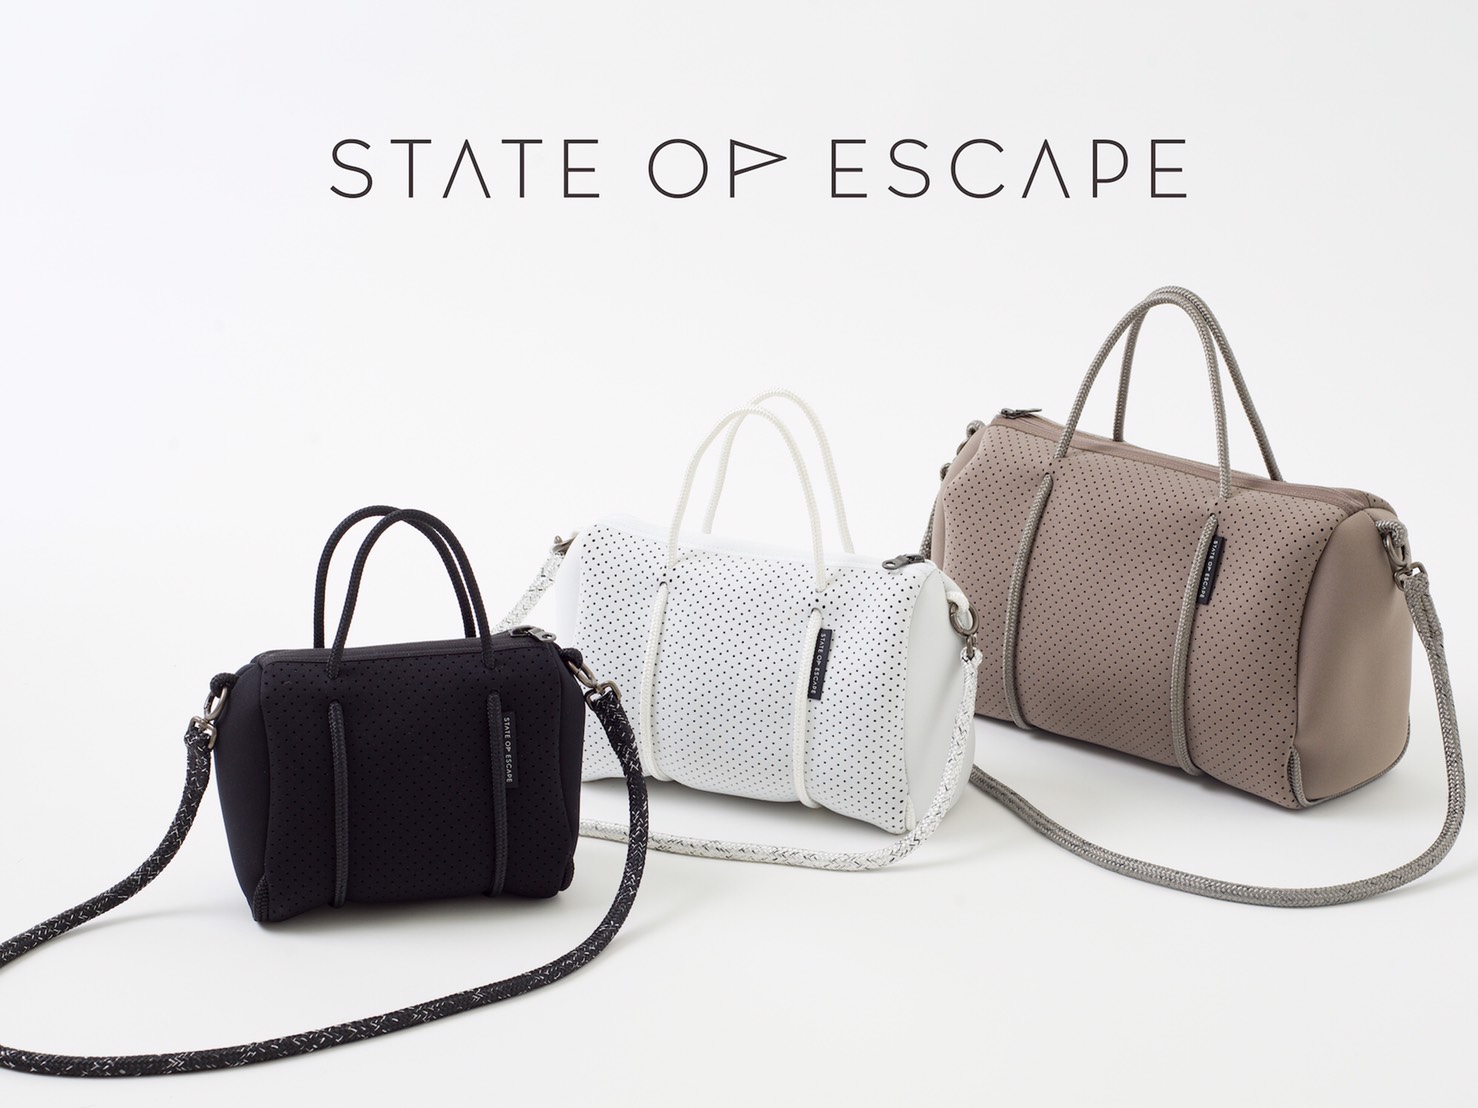 STATE OF ESCAPE ステートオブエスケープロンハーマン - www.dgcn.co.jp